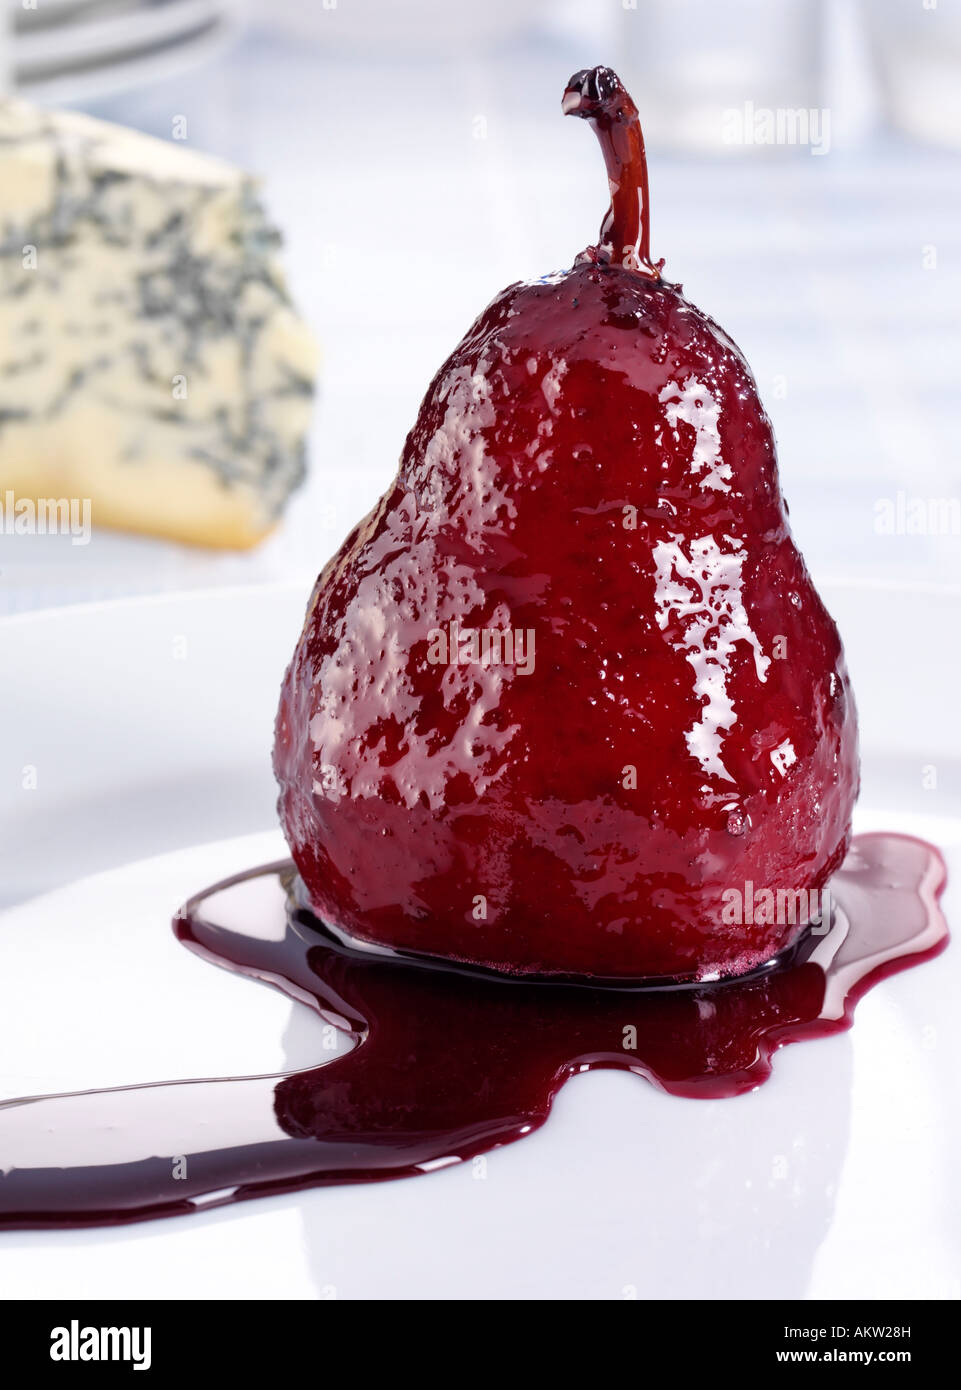 PEAR WITH RED WINE SAUCE Stock Photo